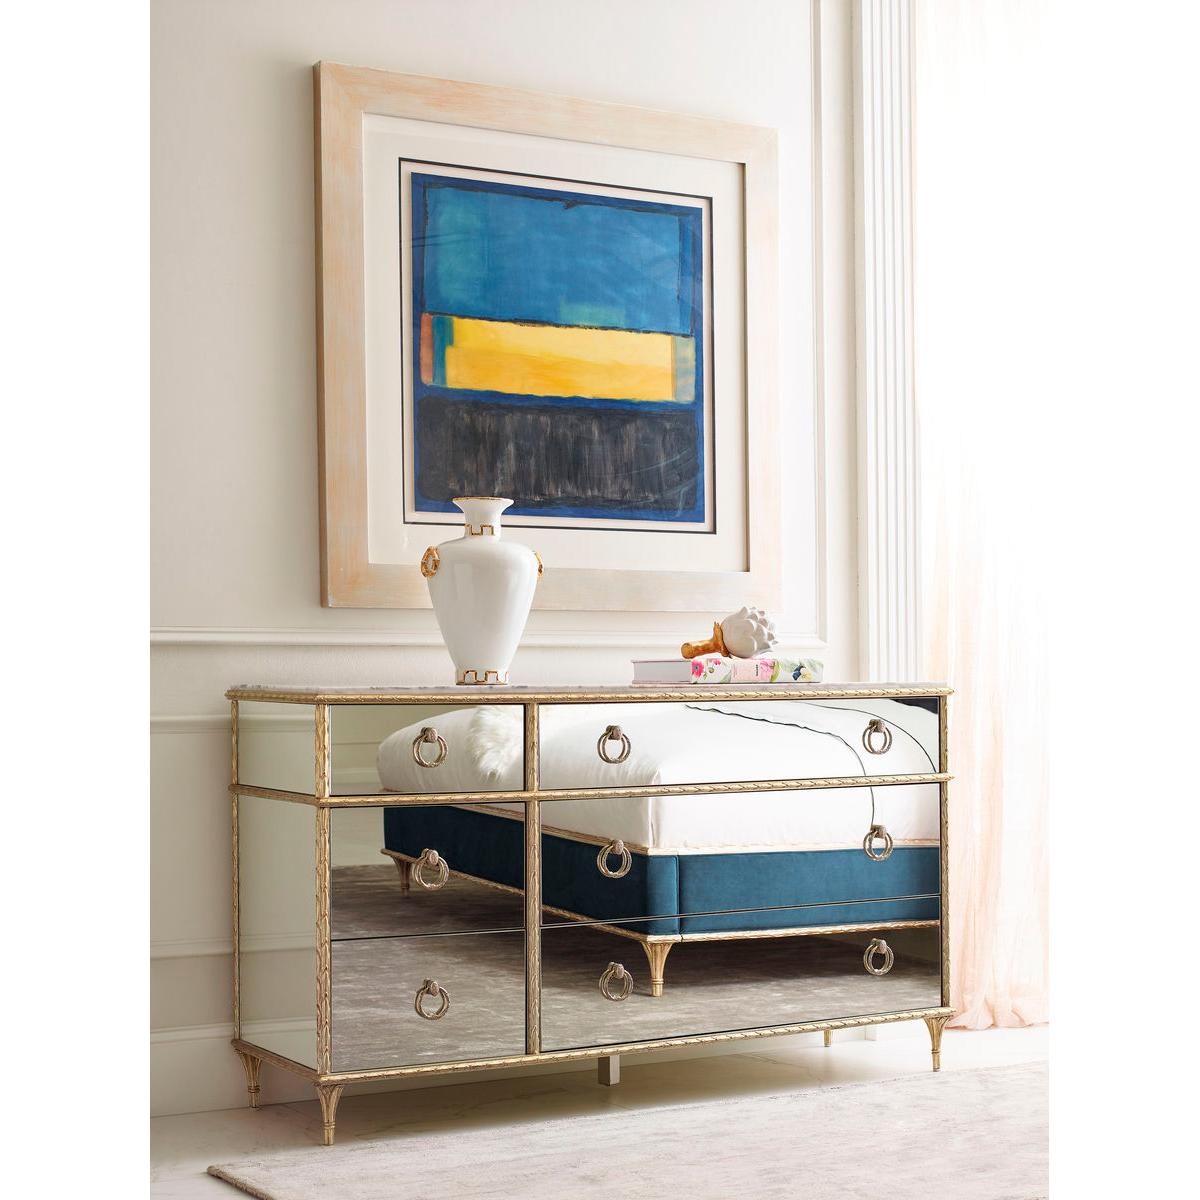 This dresser offers a stunning fusion of form and function, measuring generously to accommodate a wide array of wardrobe essentials.

The dresser features mirrored front and end panels, creating a dazzling reflective surface that enhances the light